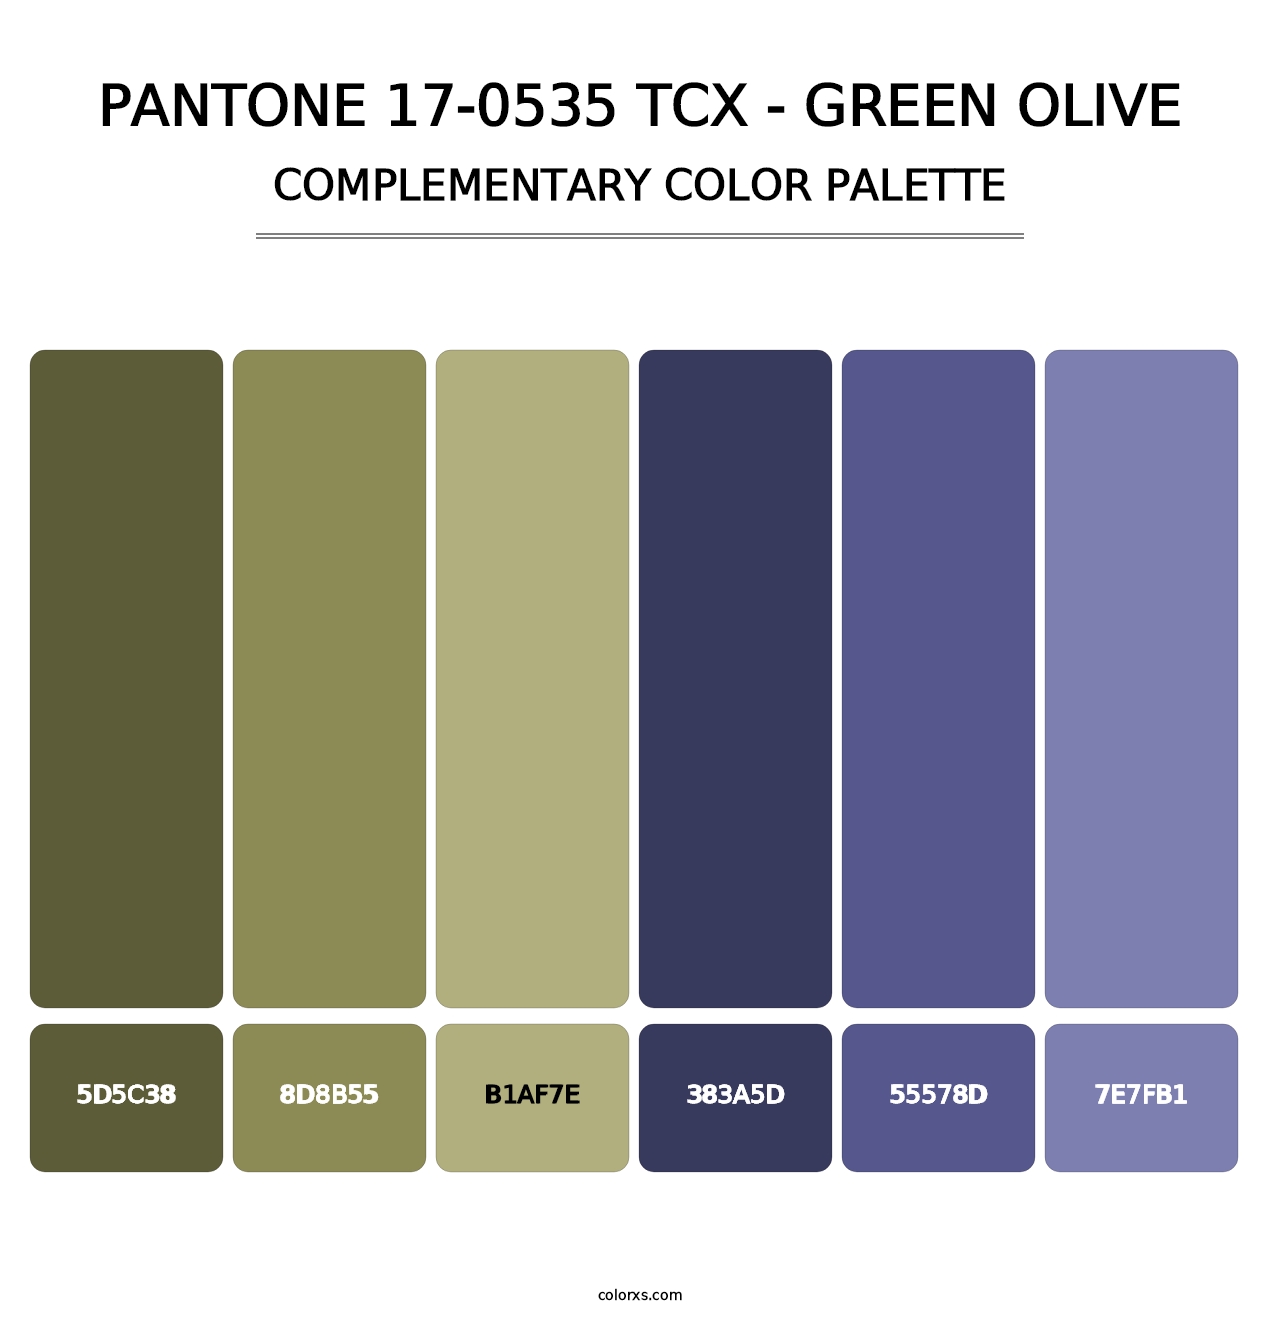 PANTONE 17-0535 TCX - Green Olive - Complementary Color Palette